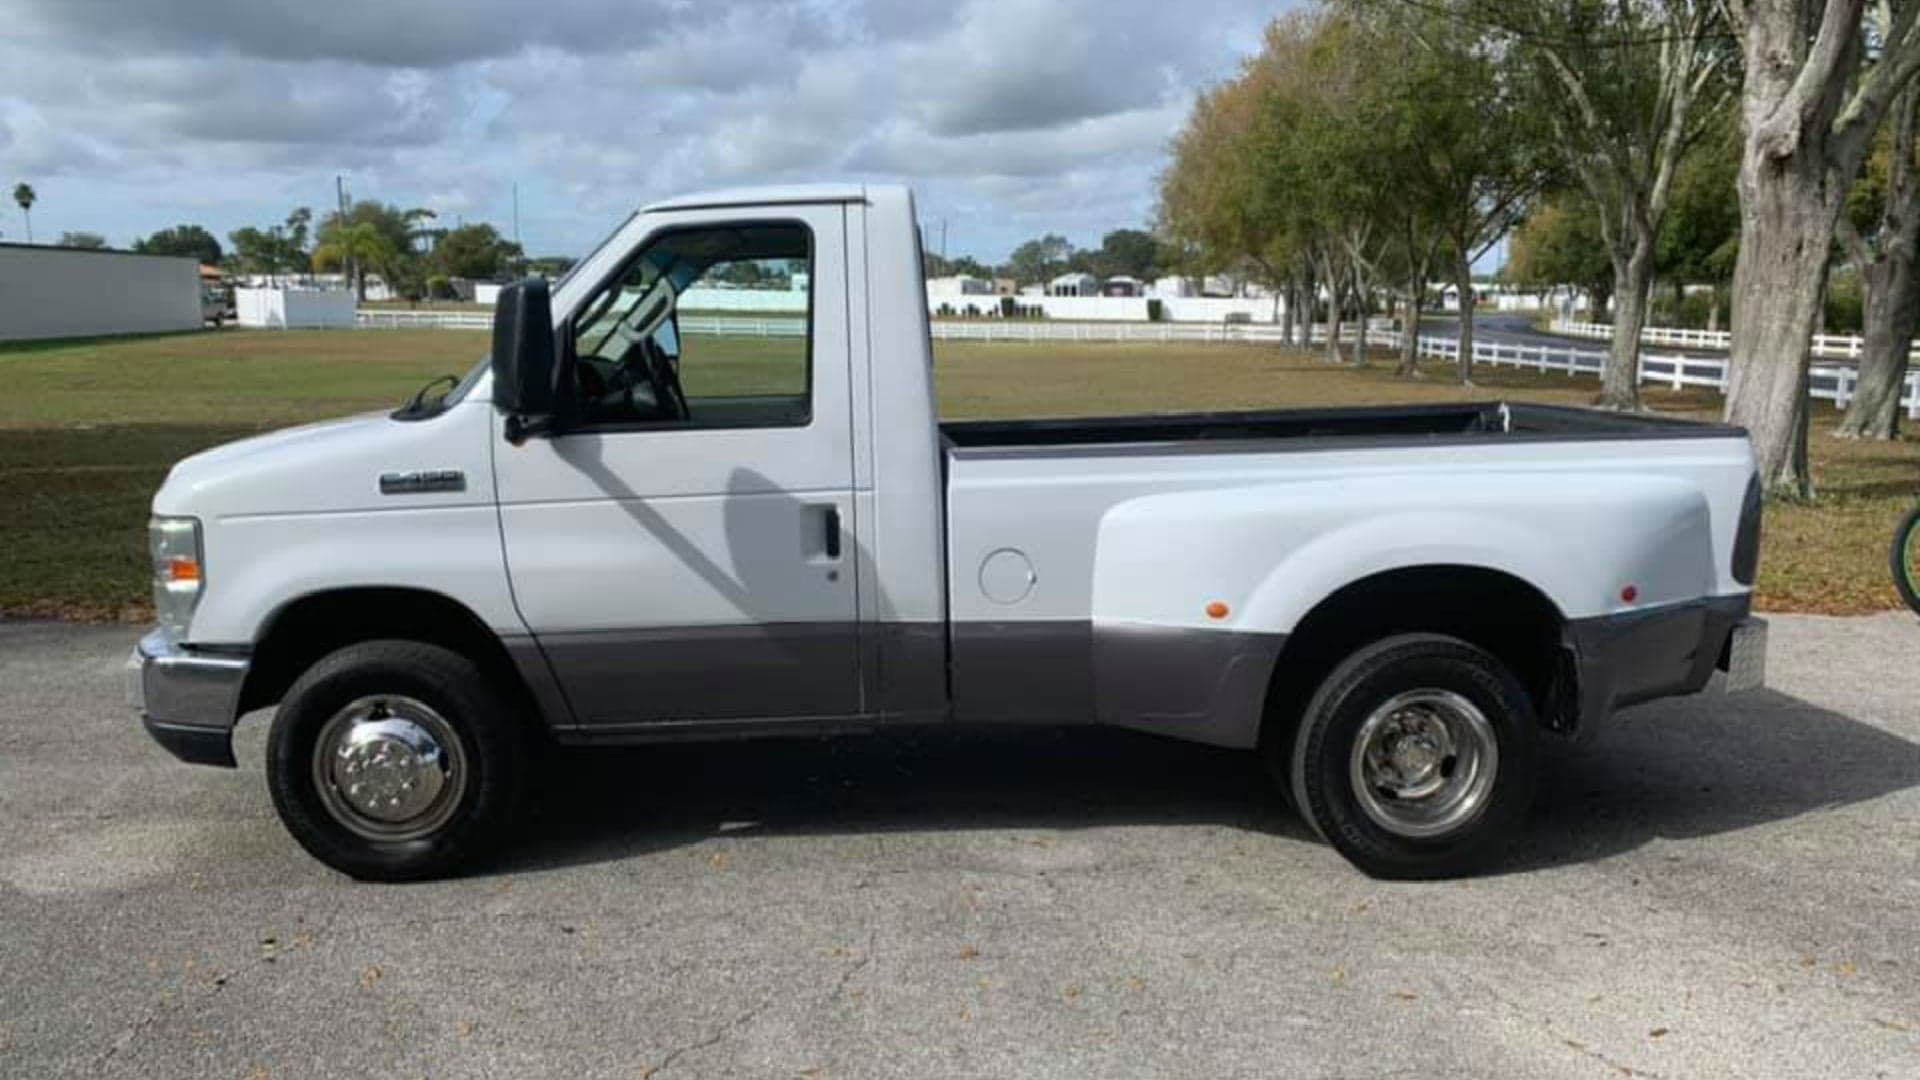 This Ford E-Series Dually Is the Pickup You Drew in Elementary School